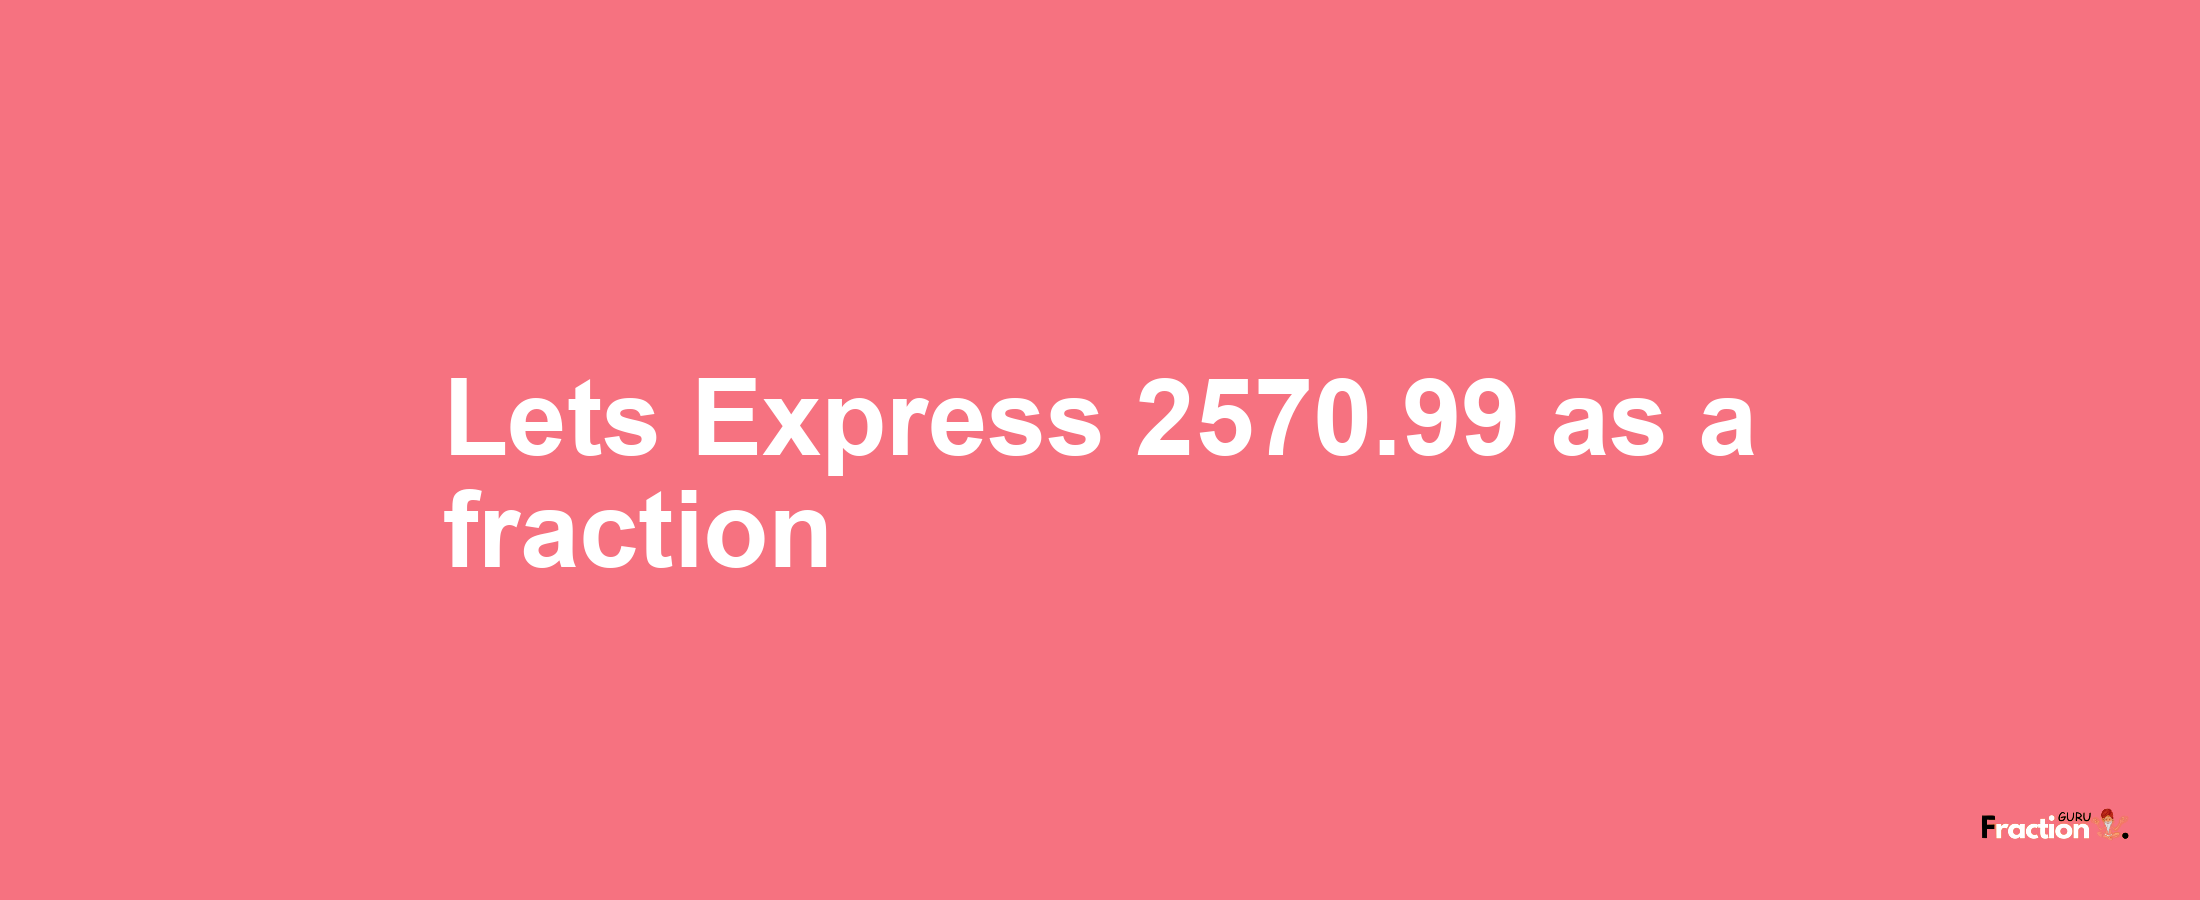 Lets Express 2570.99 as afraction